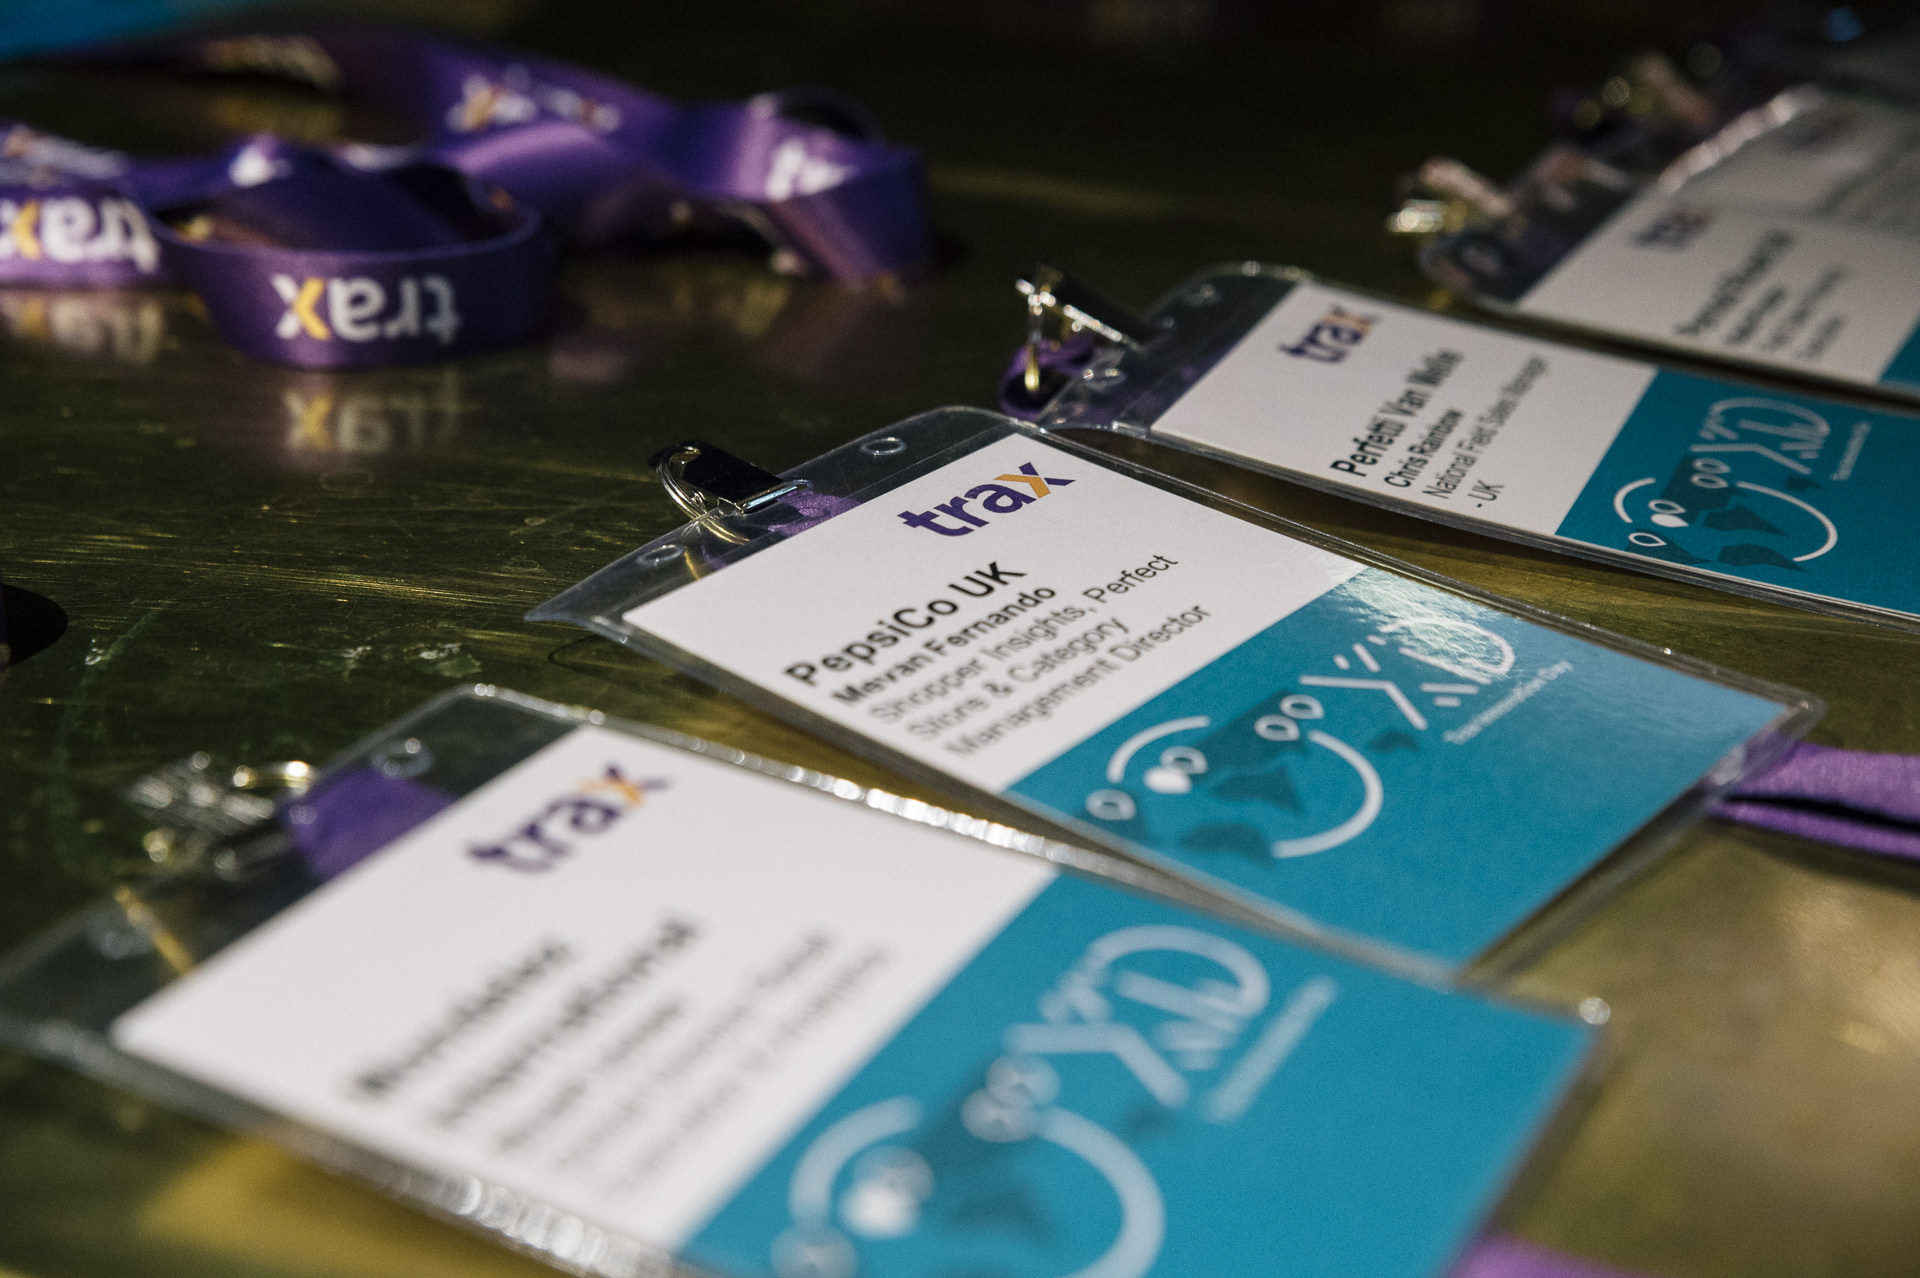 trax innovation day 2019 london badges